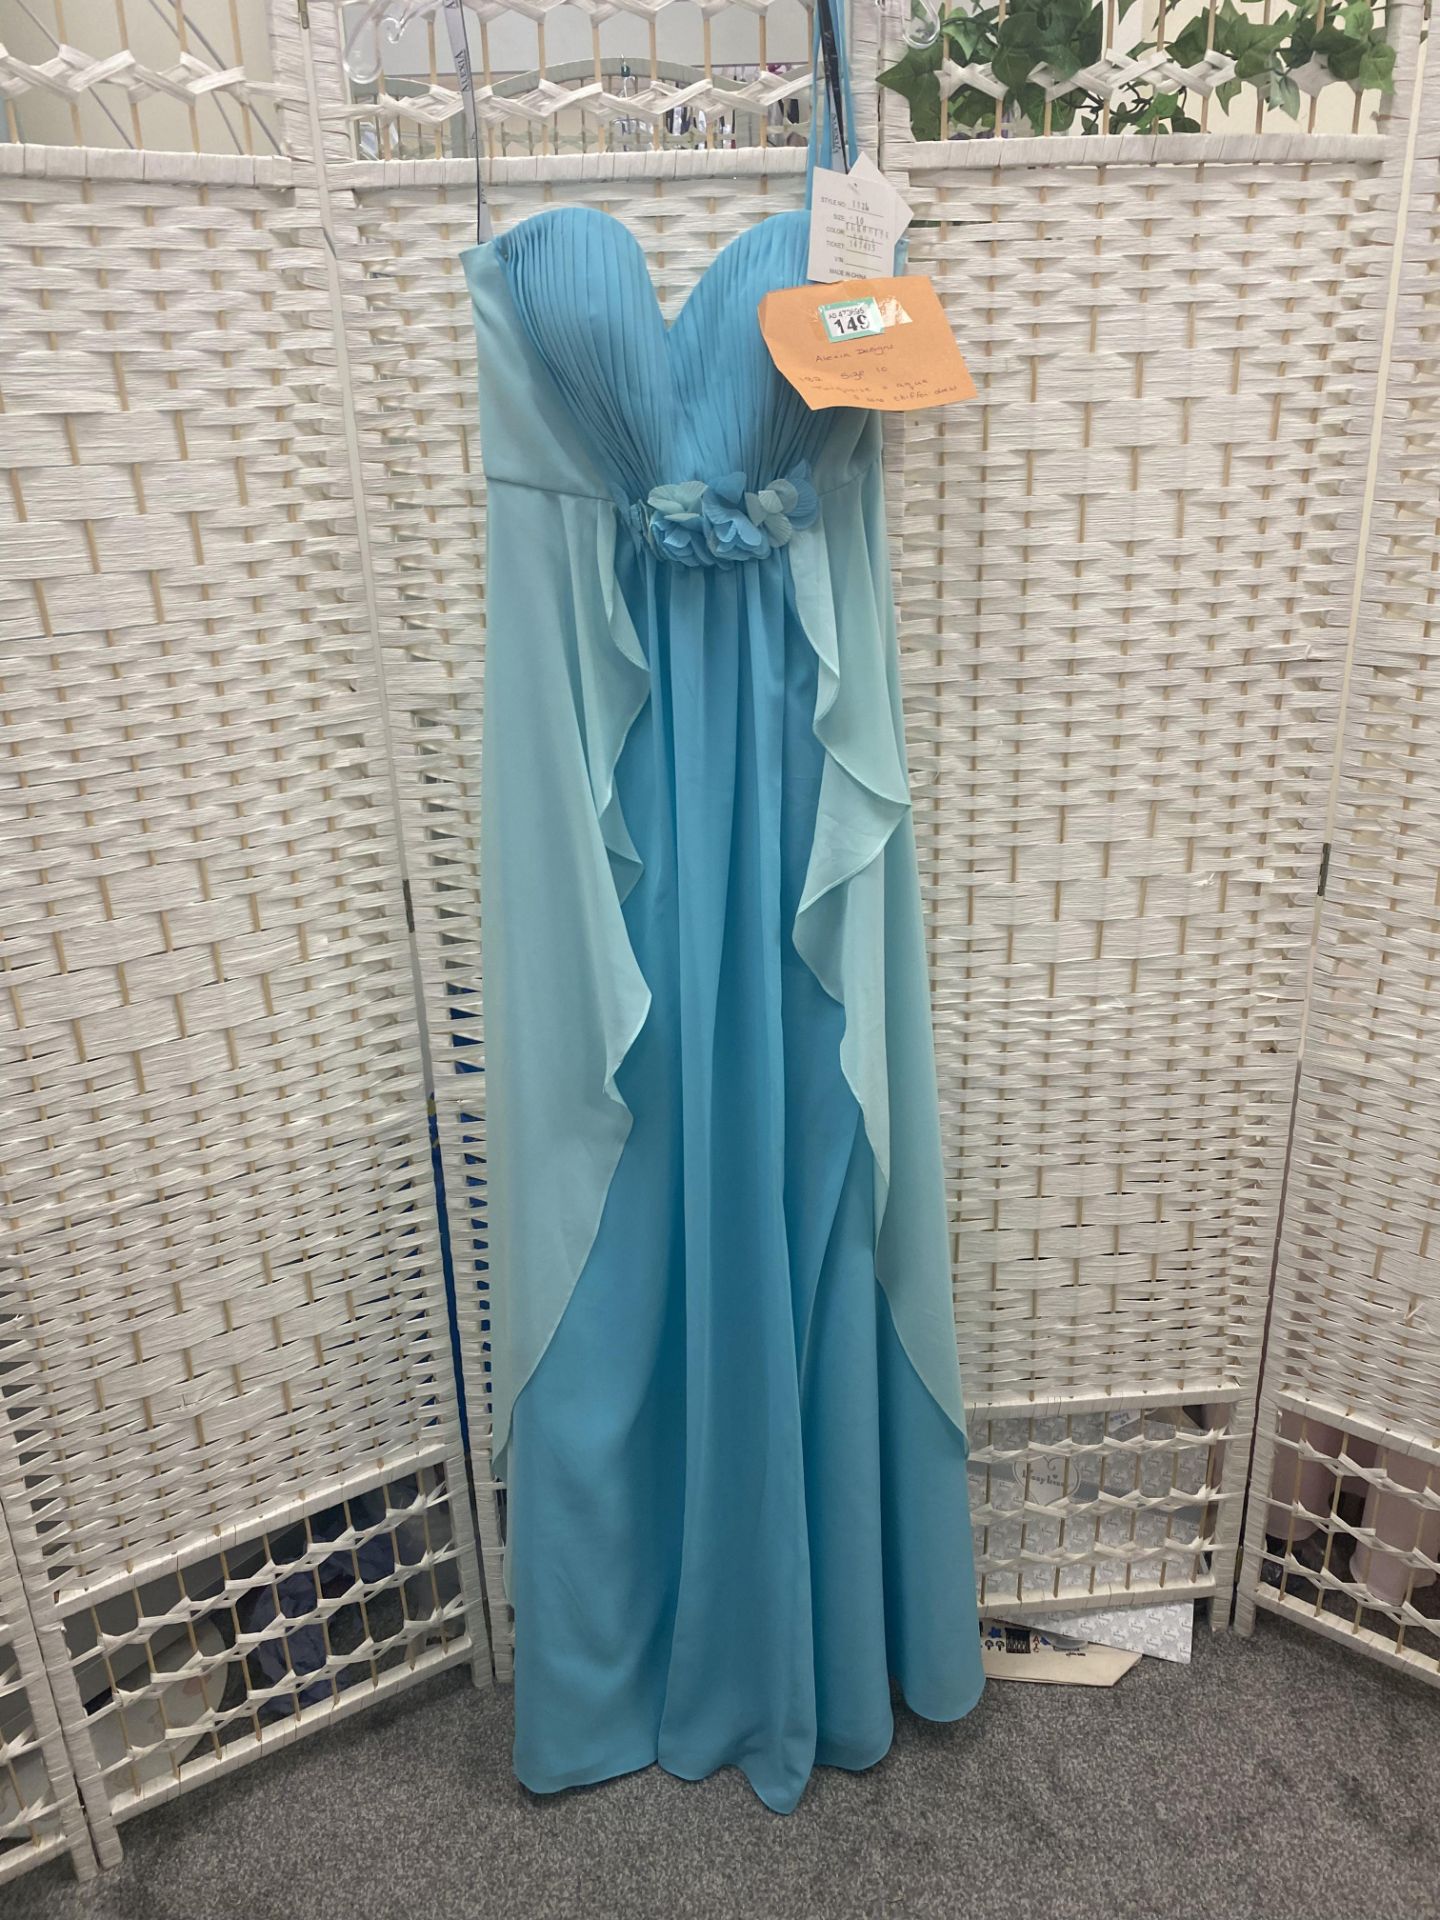 Alexia Designs Prom Dress Ivory and Turquoise Size 10 - Image 2 of 3